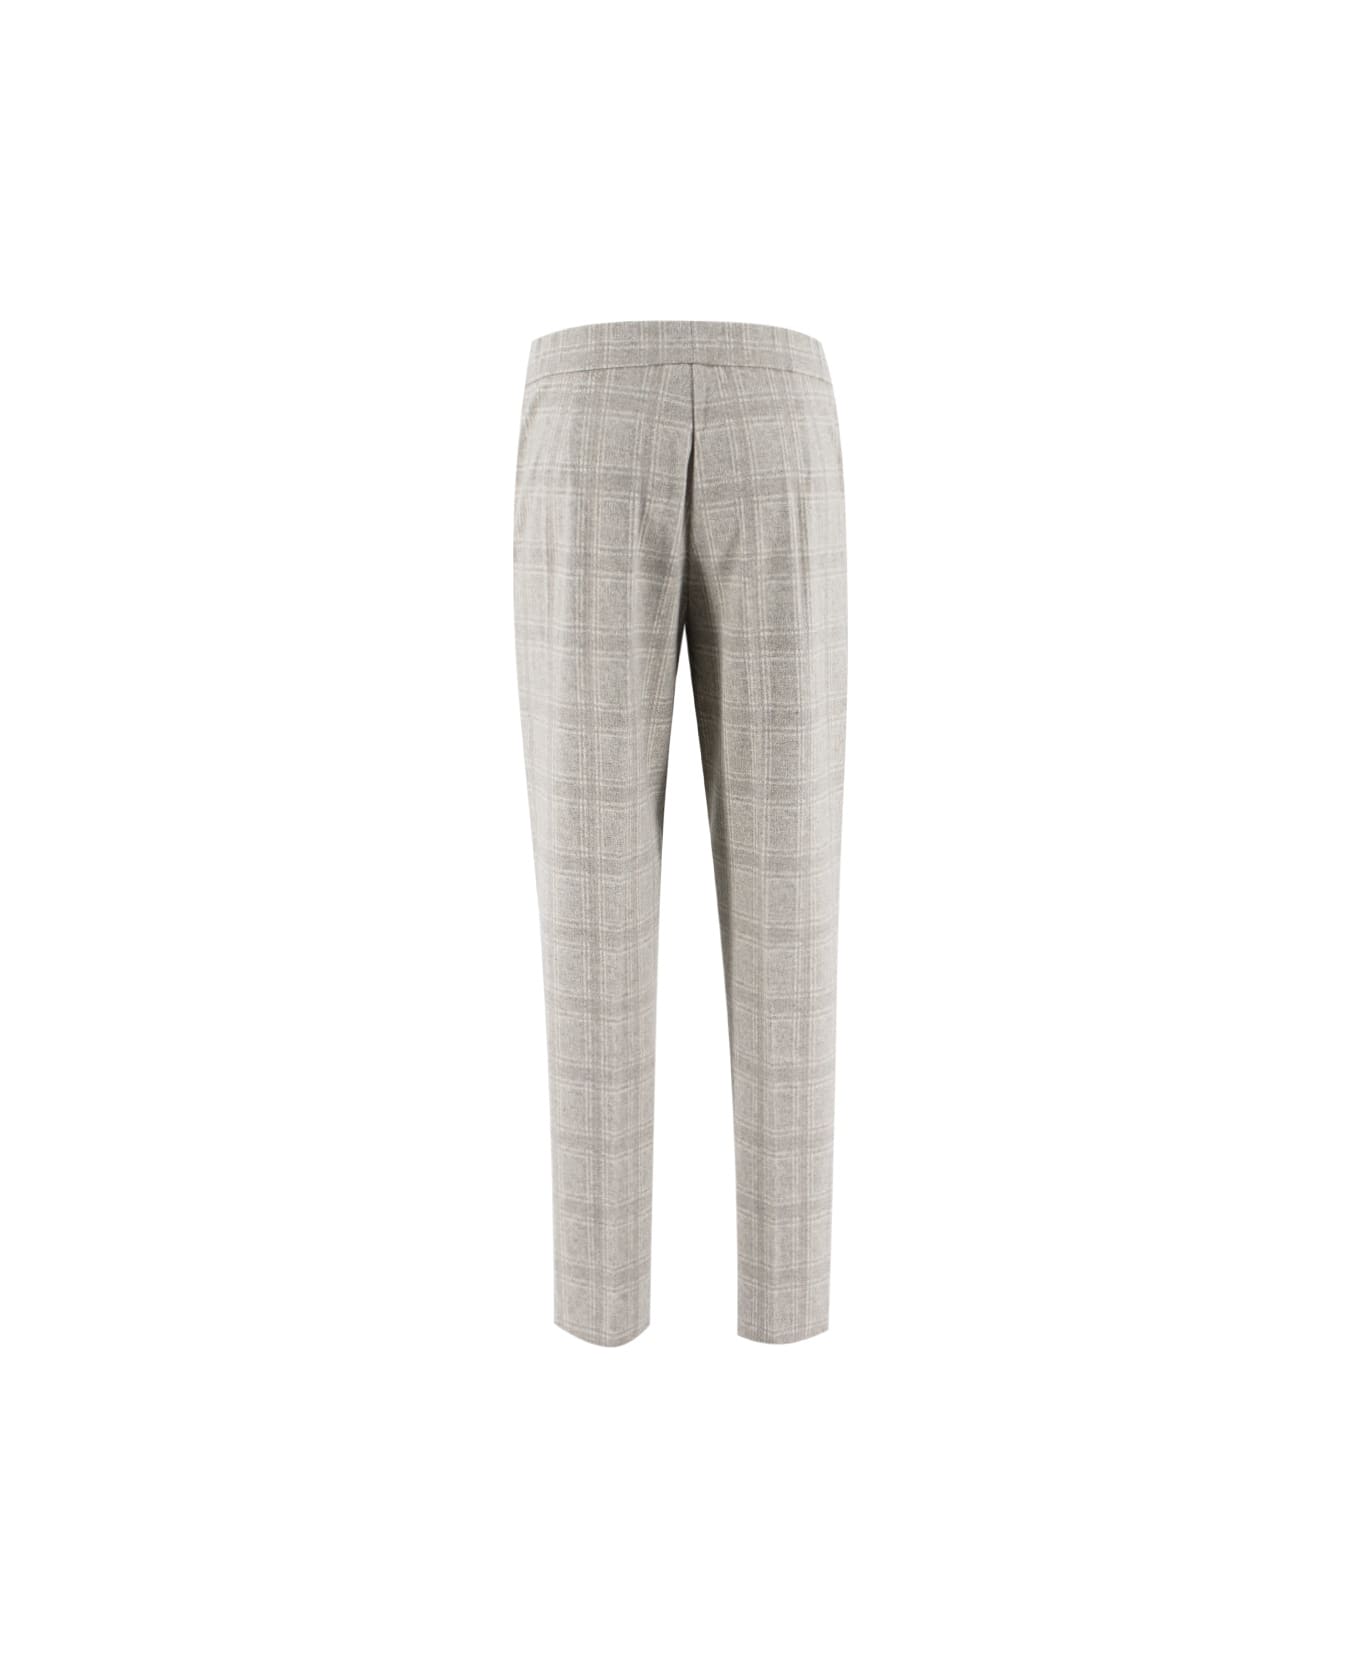 Le Tricot Perugia Trousers - GREY/BEIGE ボトムス